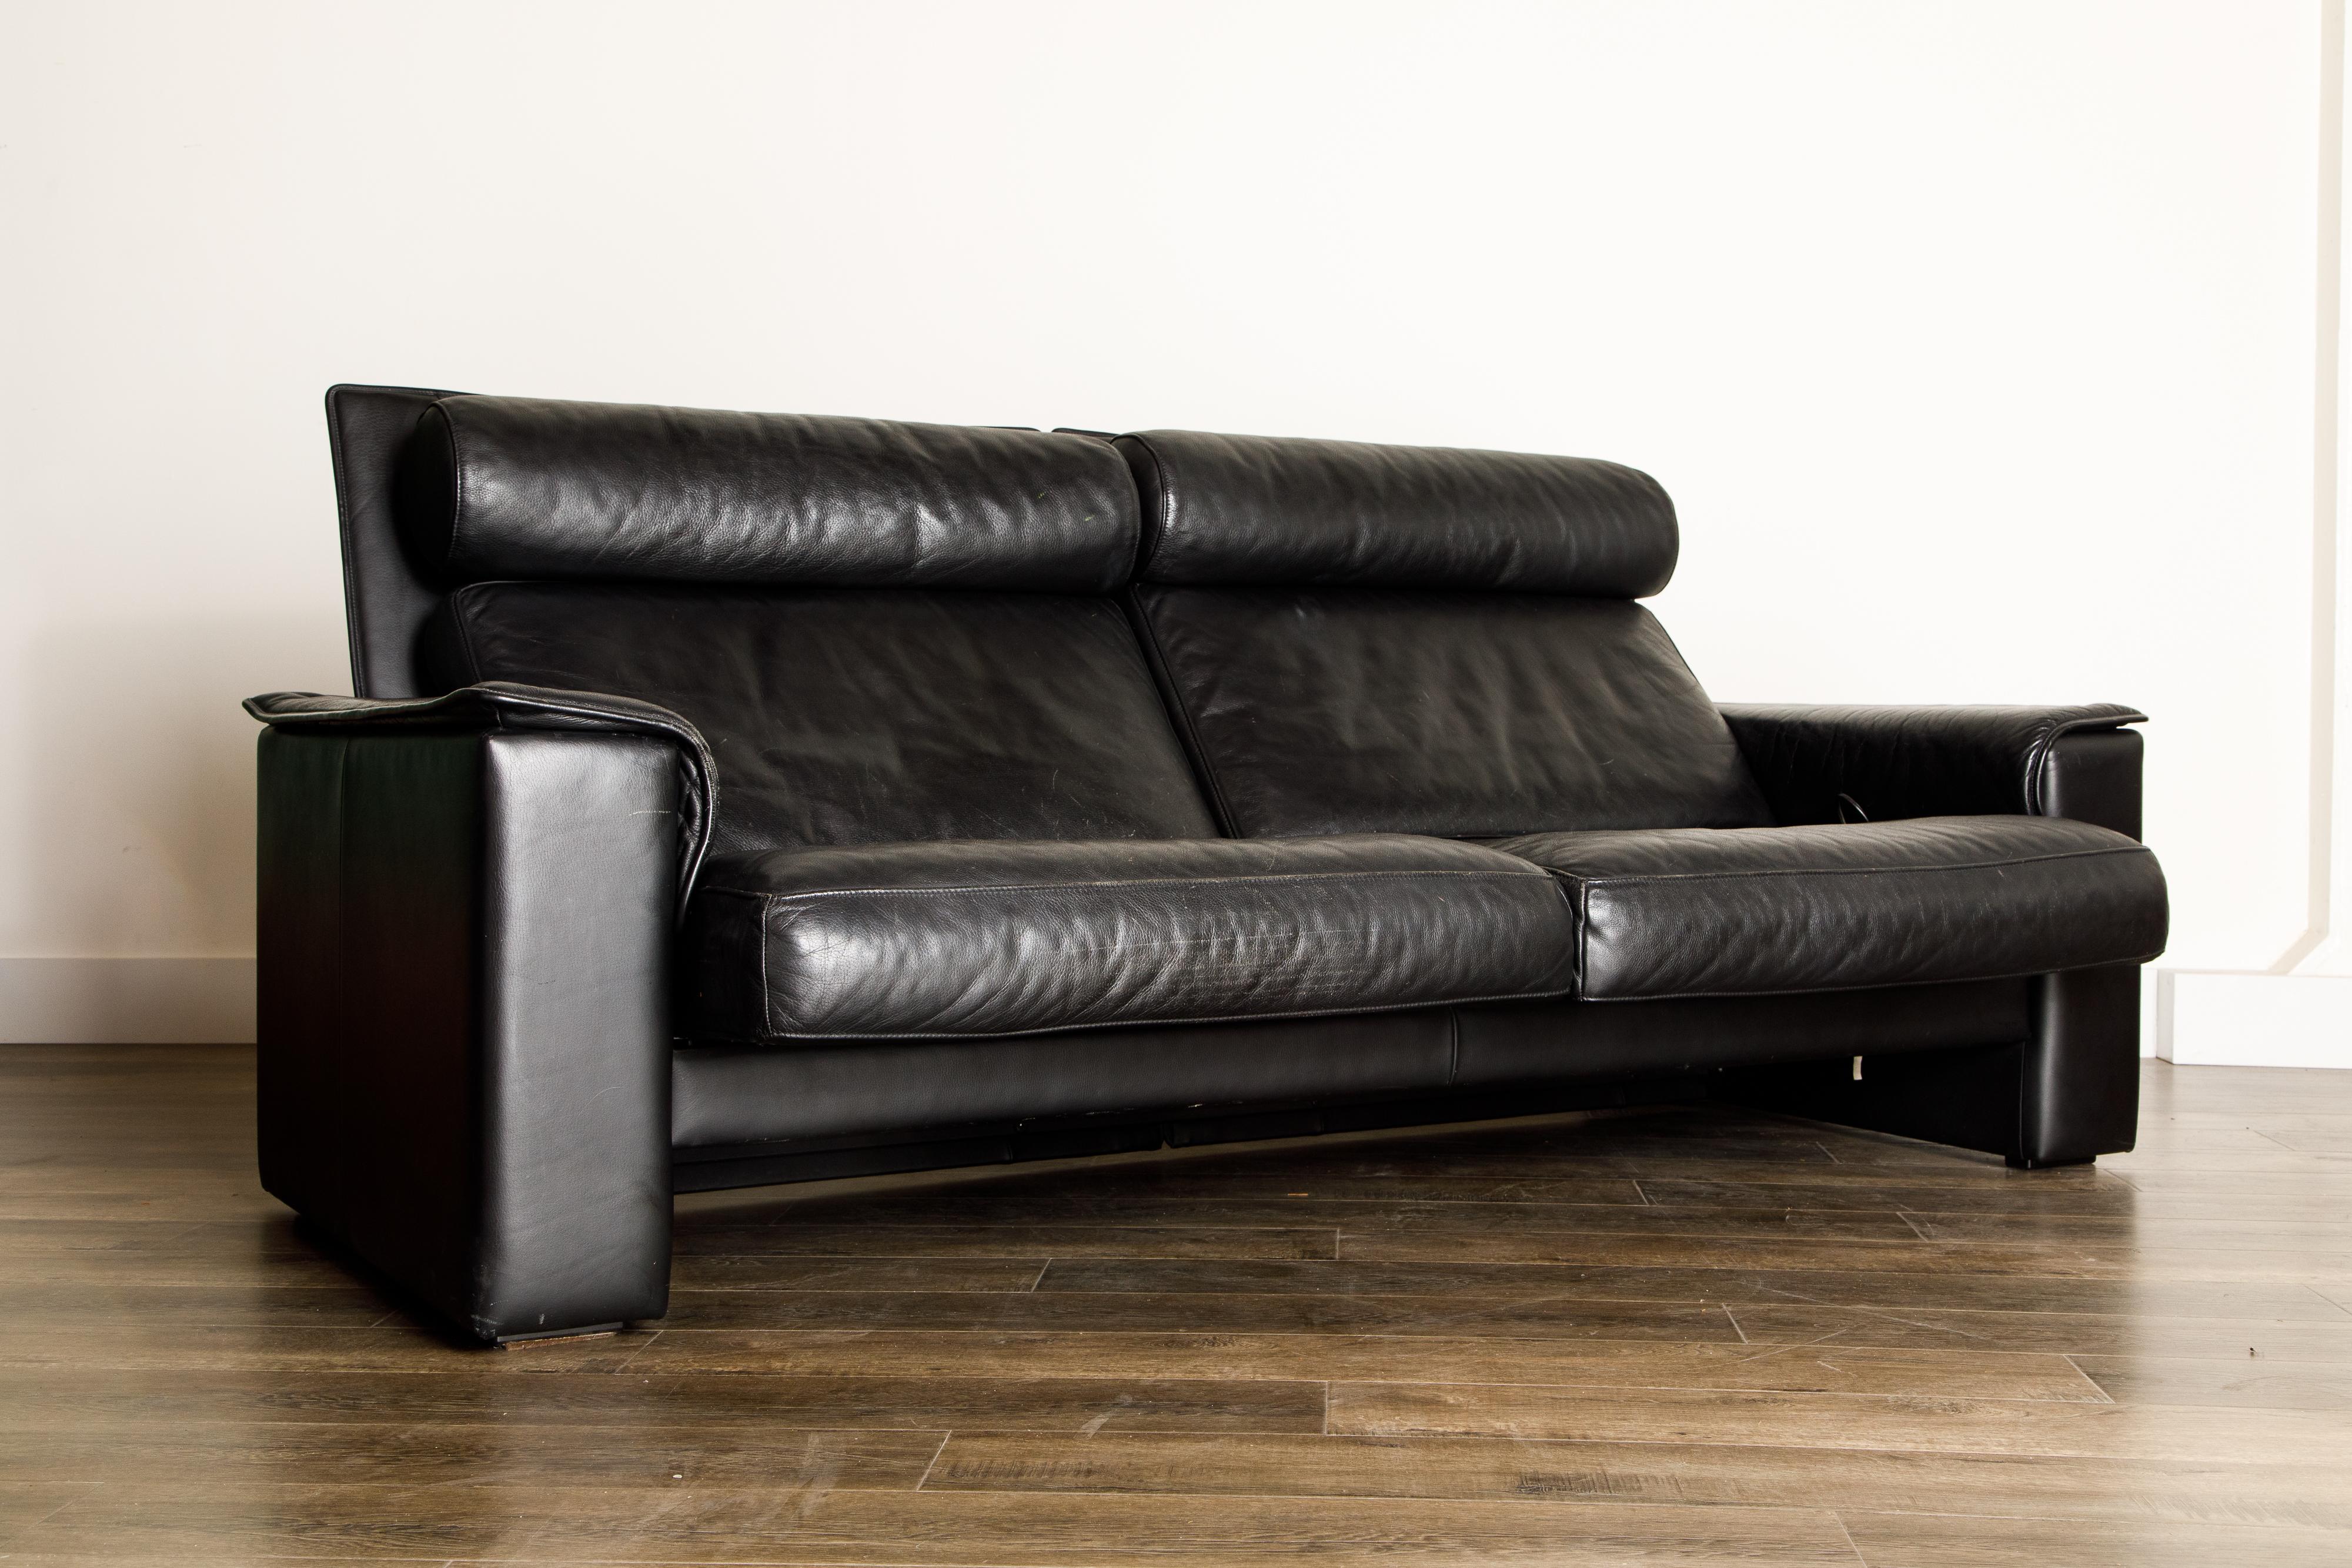 Late 20th Century De Sede Aged Black Leather Recliner Loveseat Sofa, 1970s Switzerland, Signed